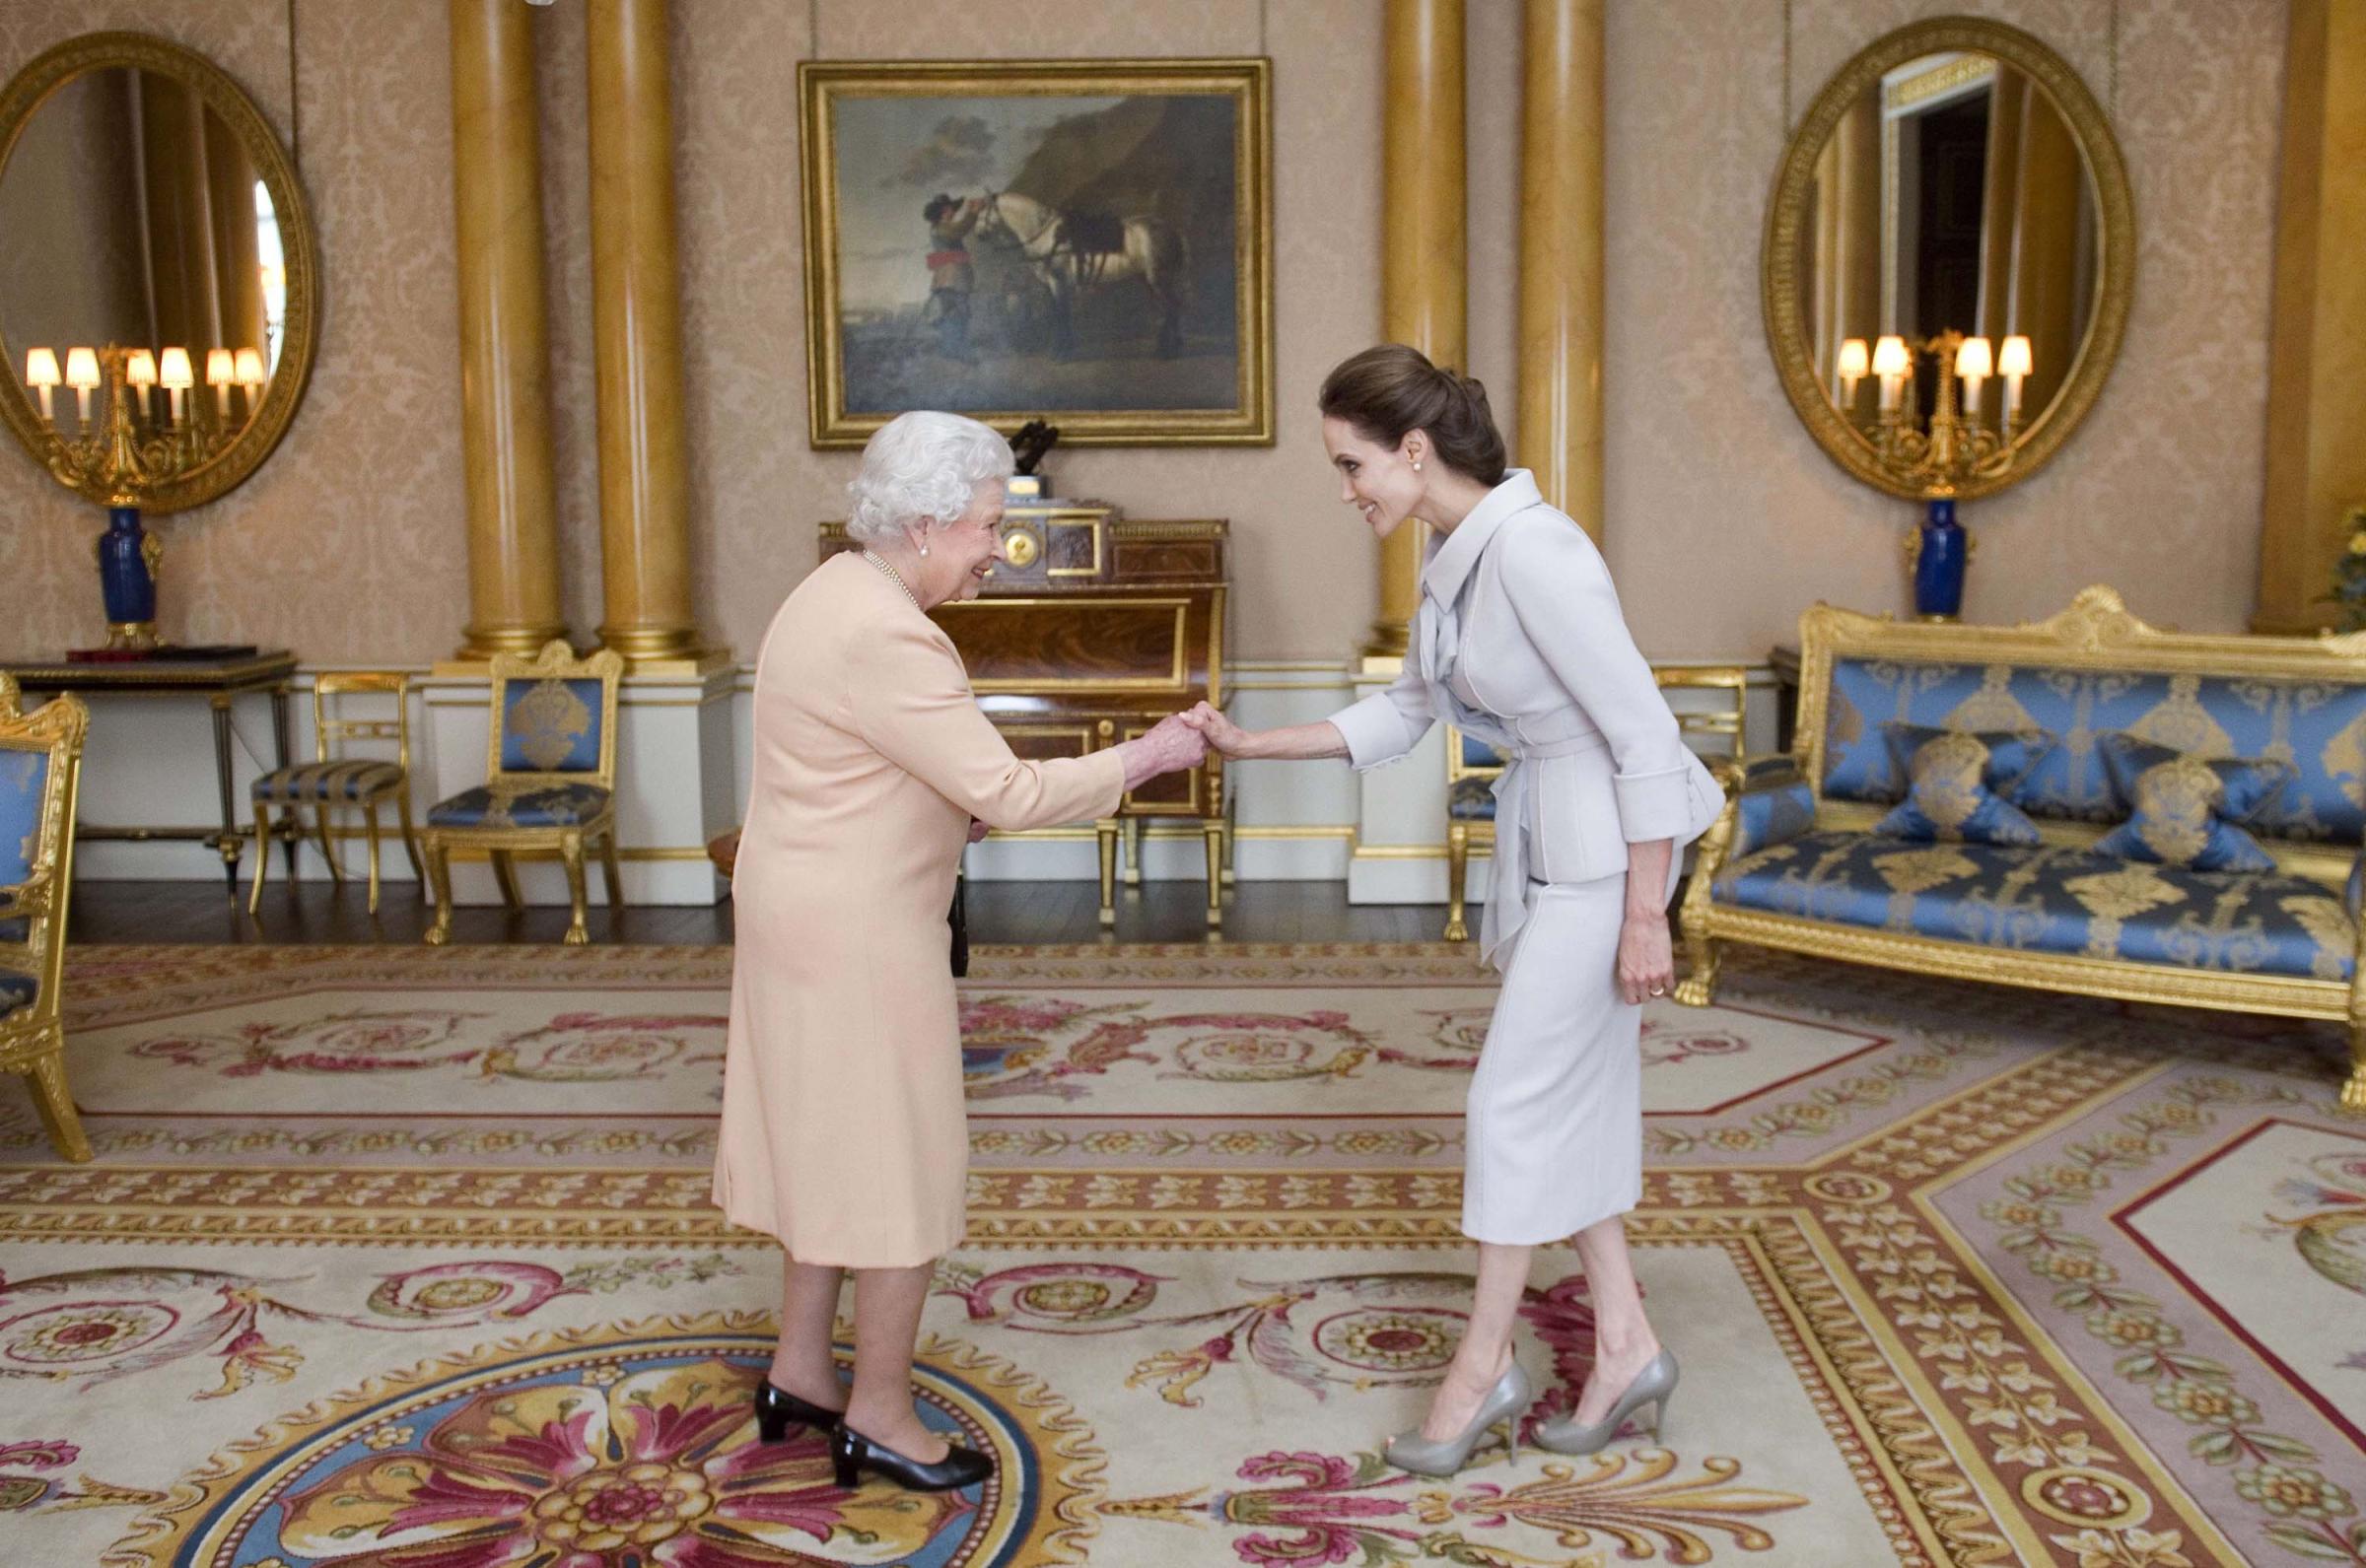 Angelina Jolie is presented with the Insignia of an Honorary Dame Grand Cross of the Most Distinguished Order of St Michael and St George by Britain's Queen Elizabeth II in the 1844 Room at Buckingham Palace in central London, on October 10, 2014.